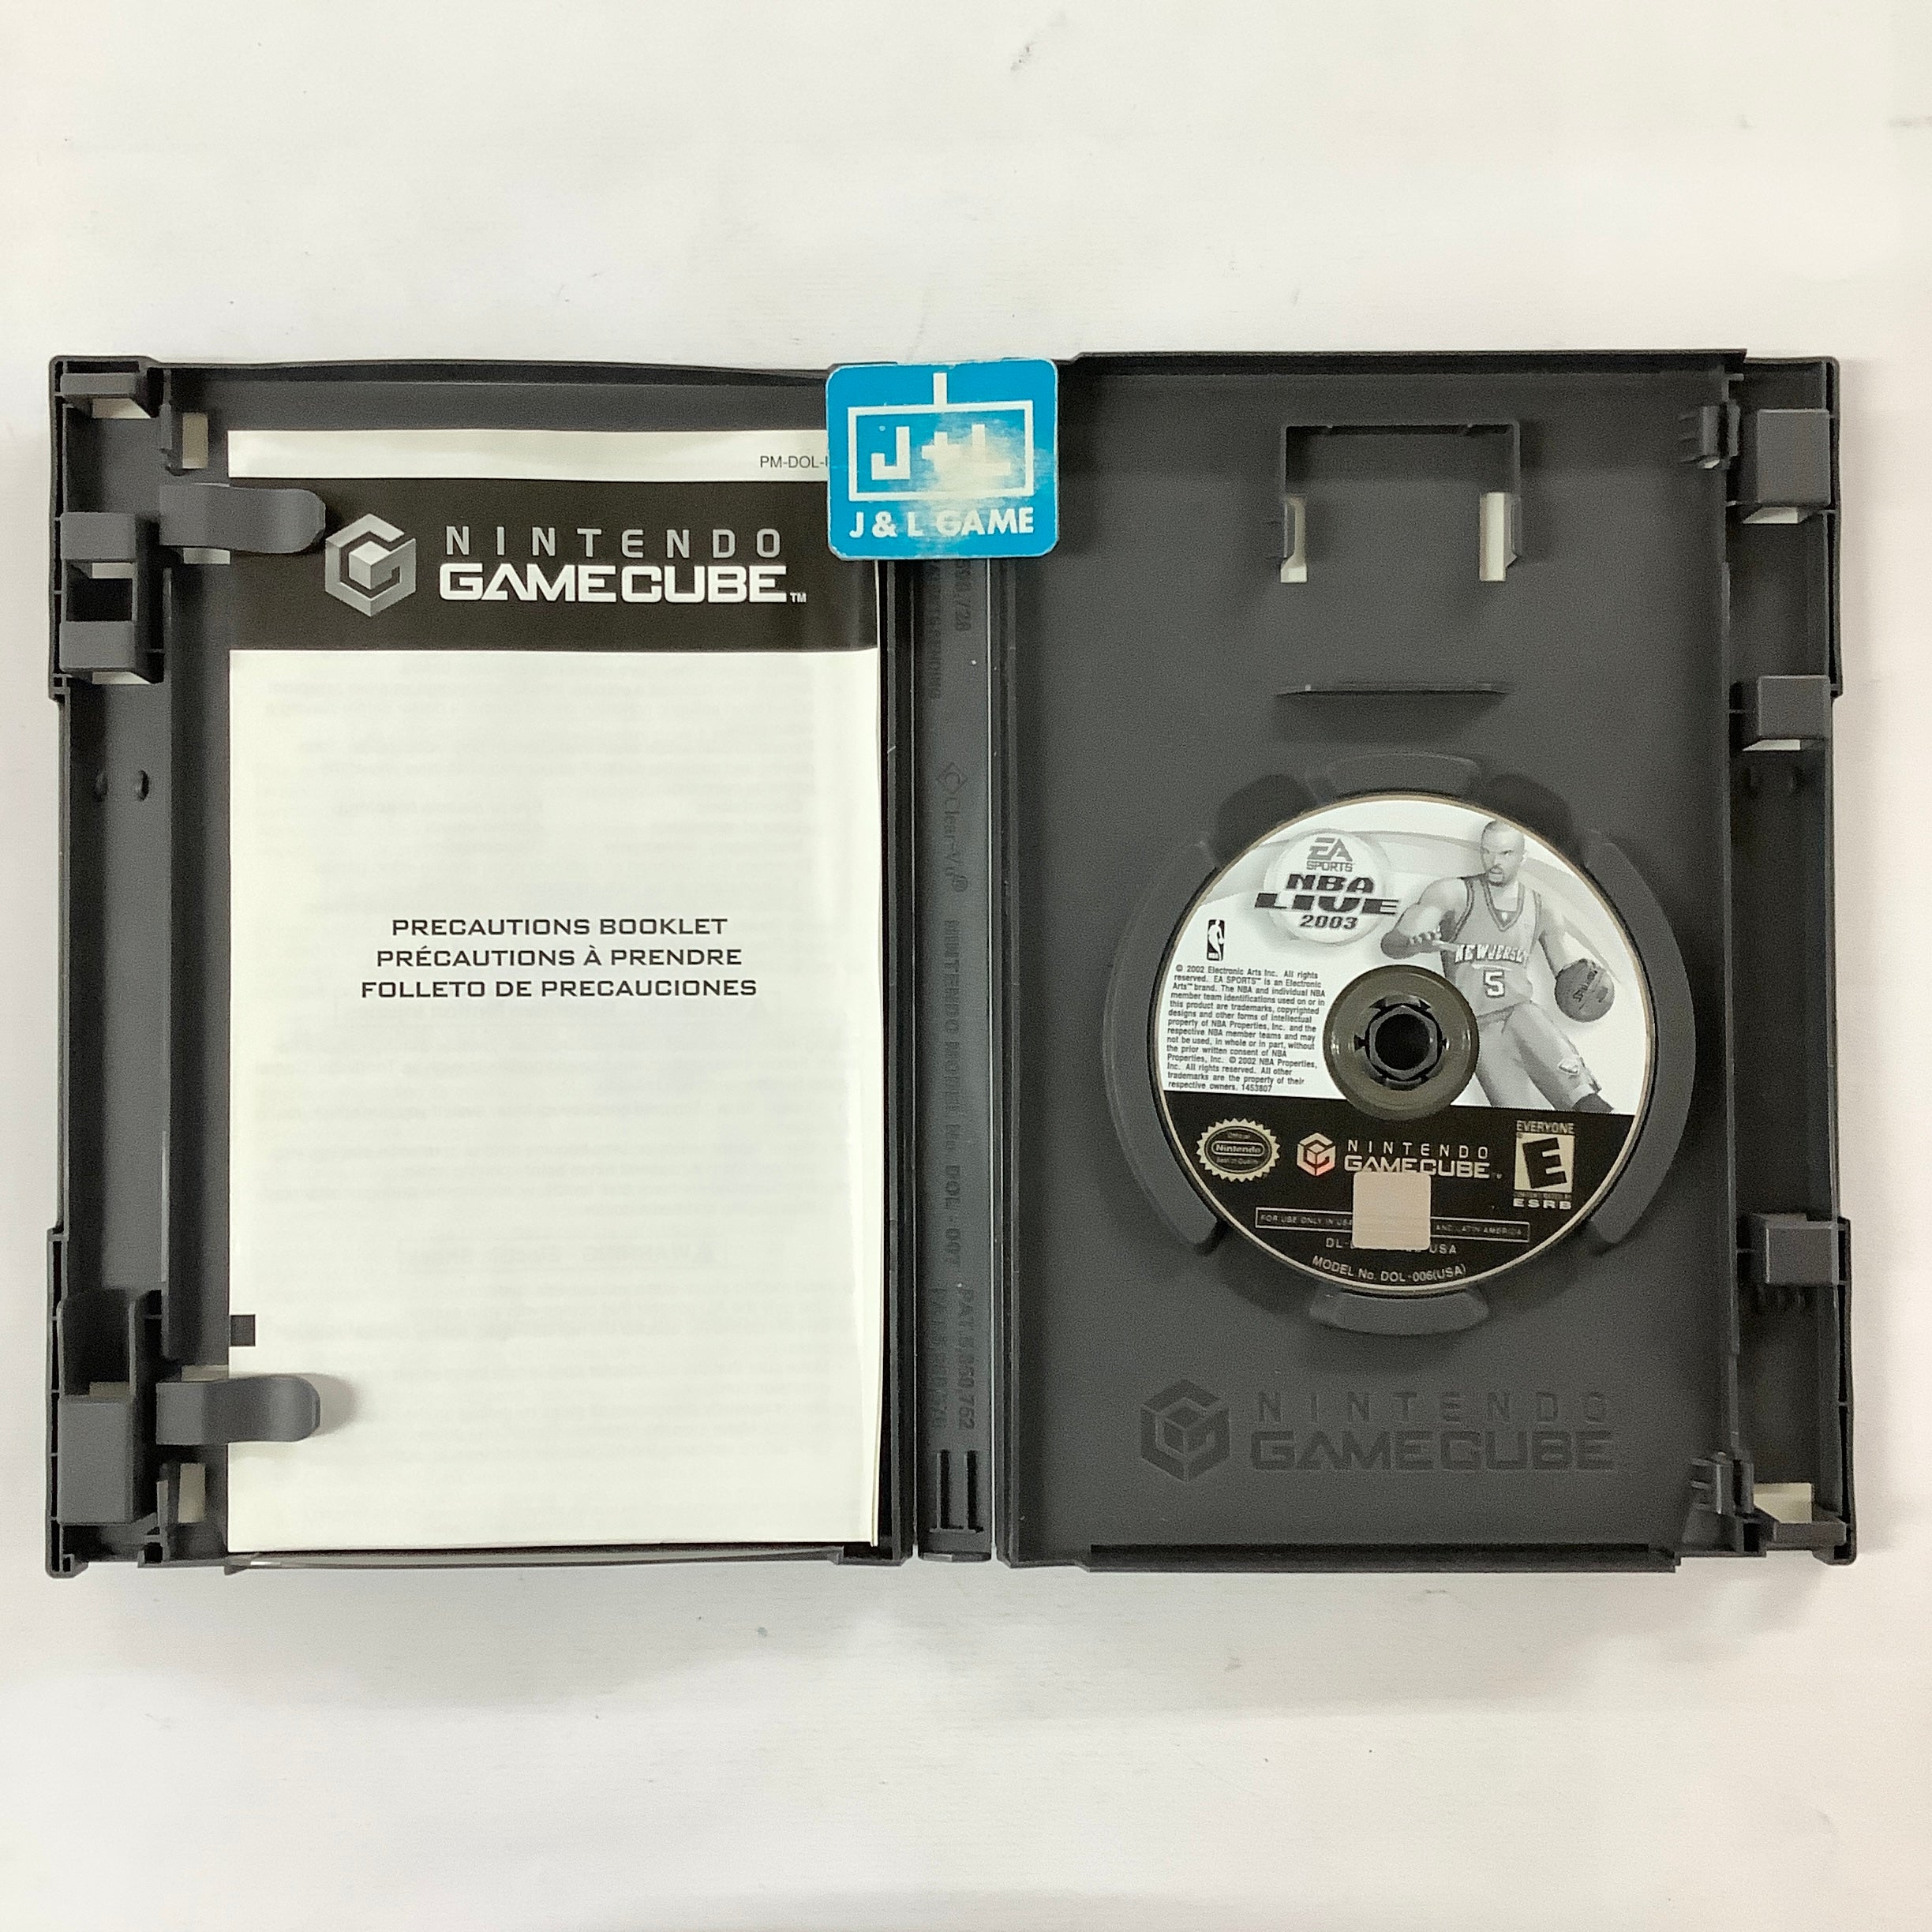 NBA Live 2003 - (GC) GameCube [Pre-Owned] Video Games EA Sports   